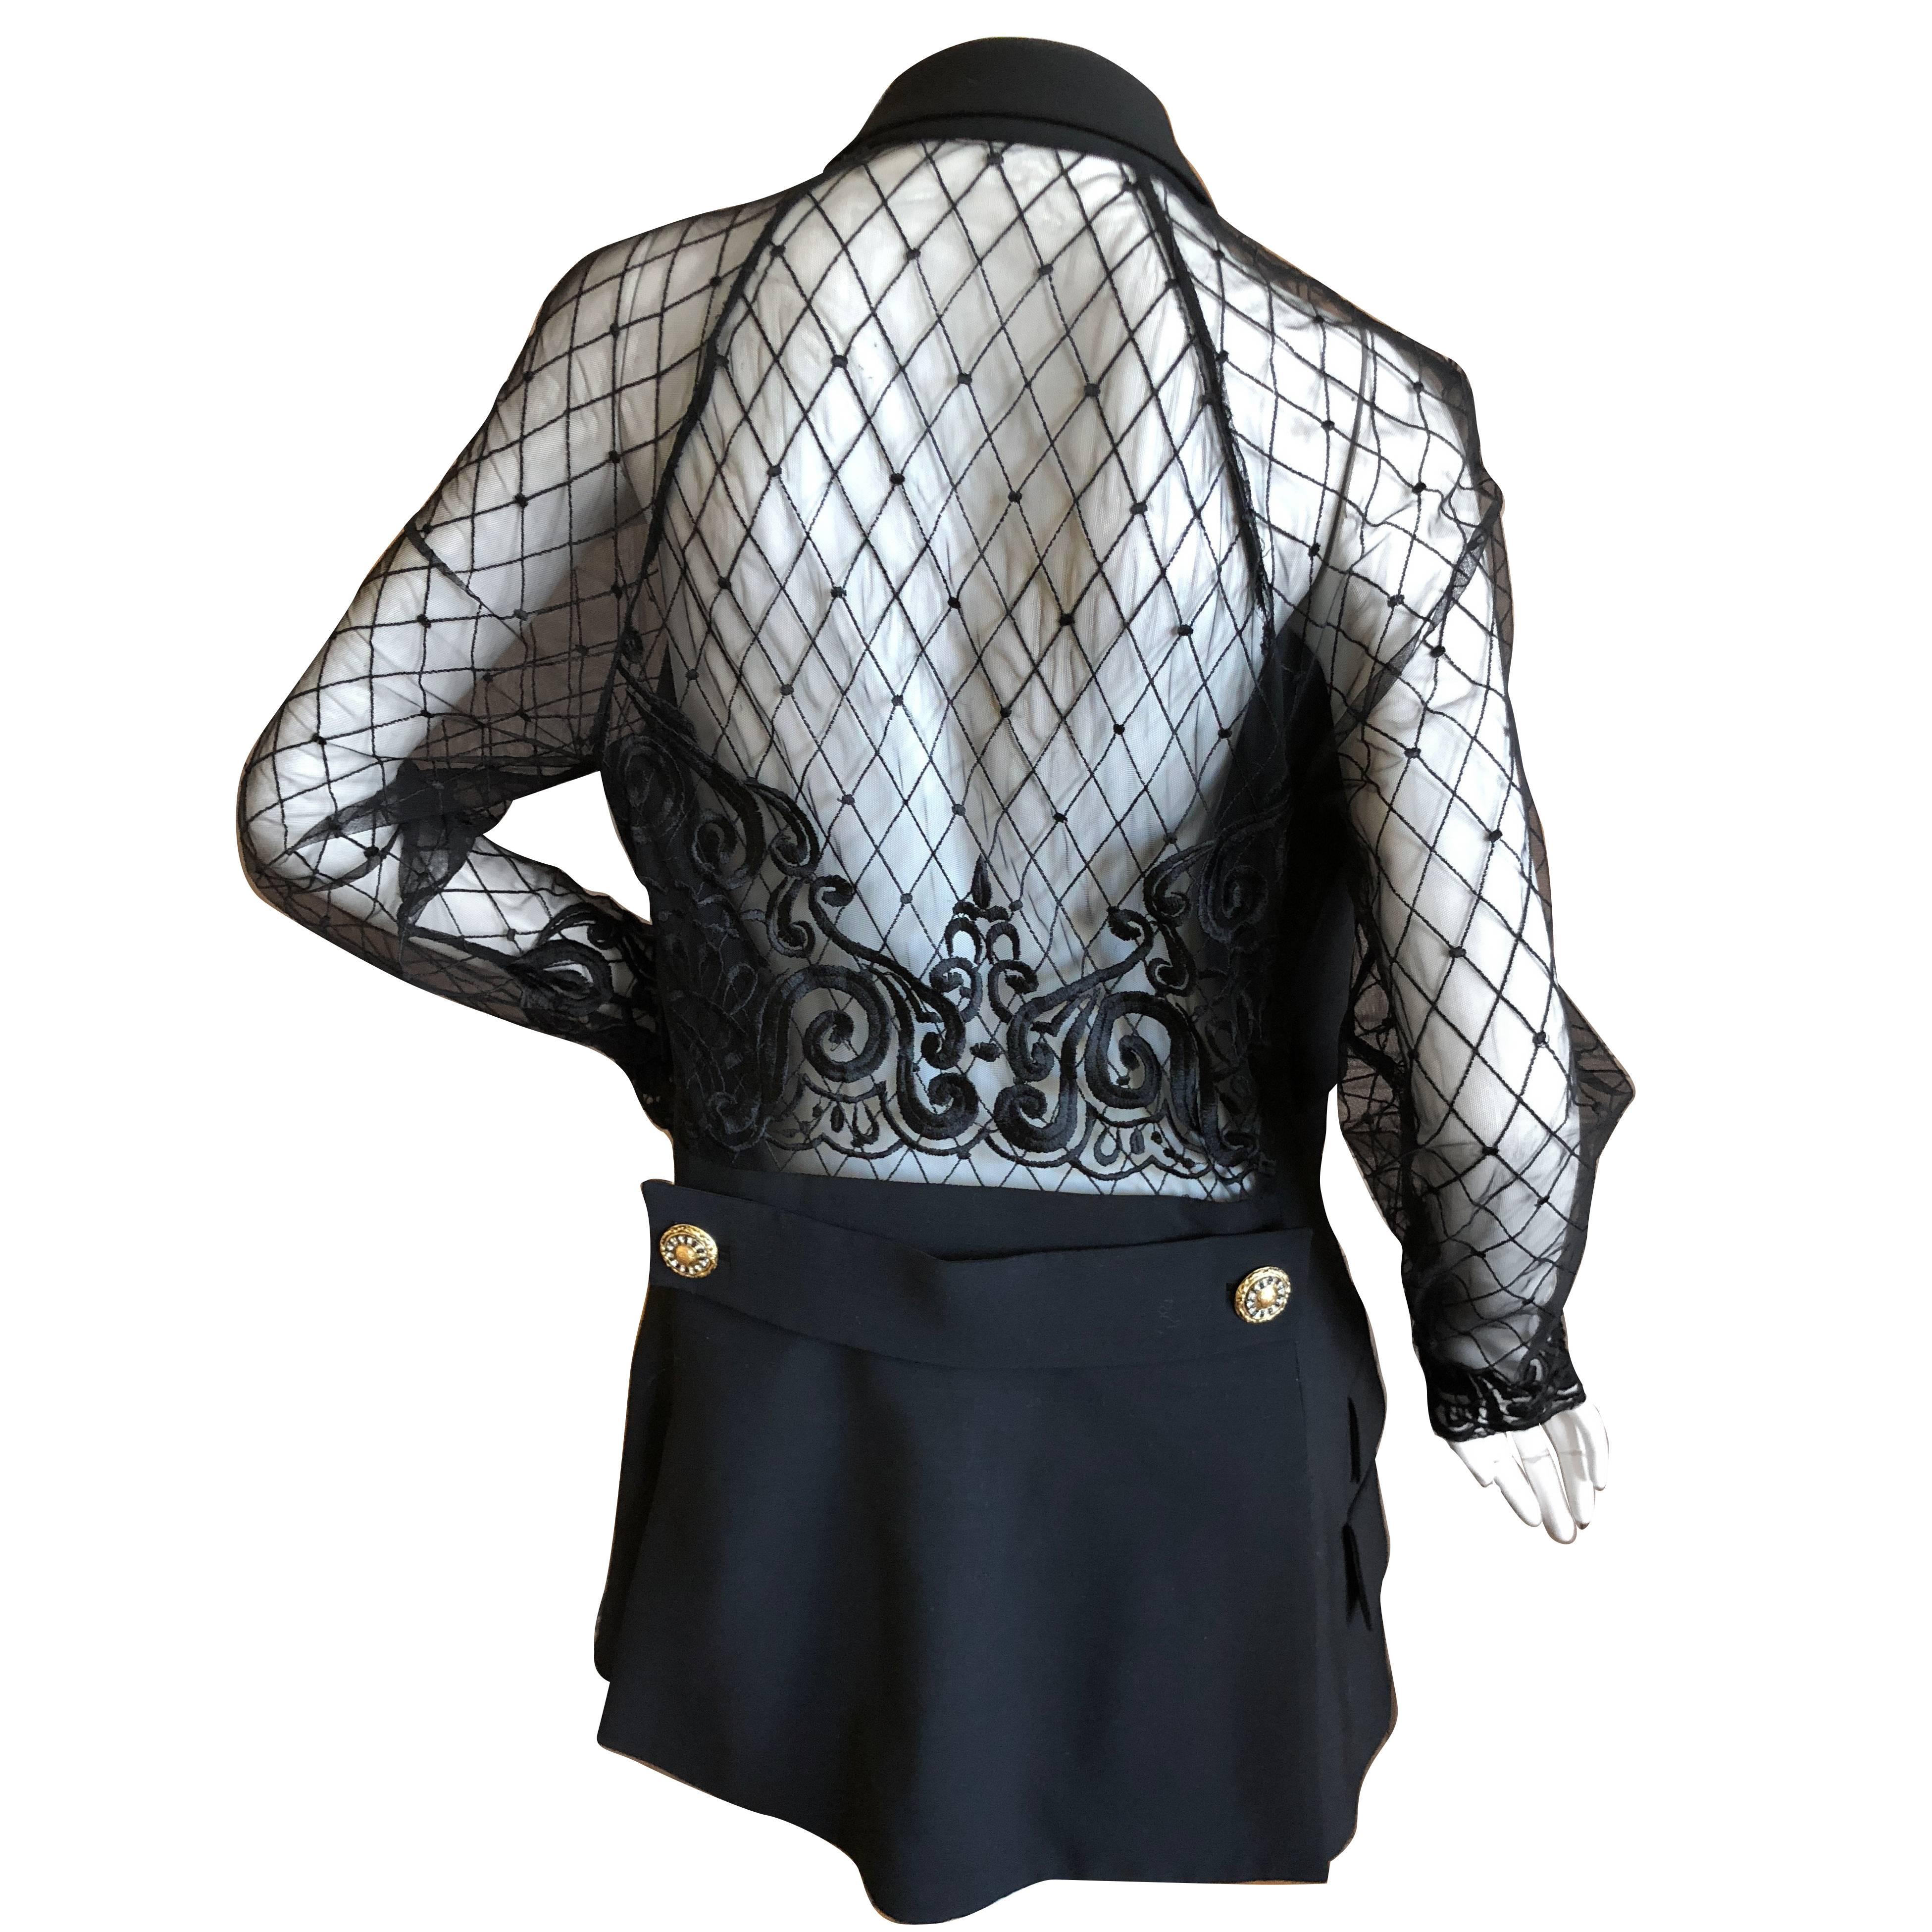 Gianni Versace Couture S 1994 Black Tux Jacket Sheer Baroque Lace Back & Sleeves For Sale